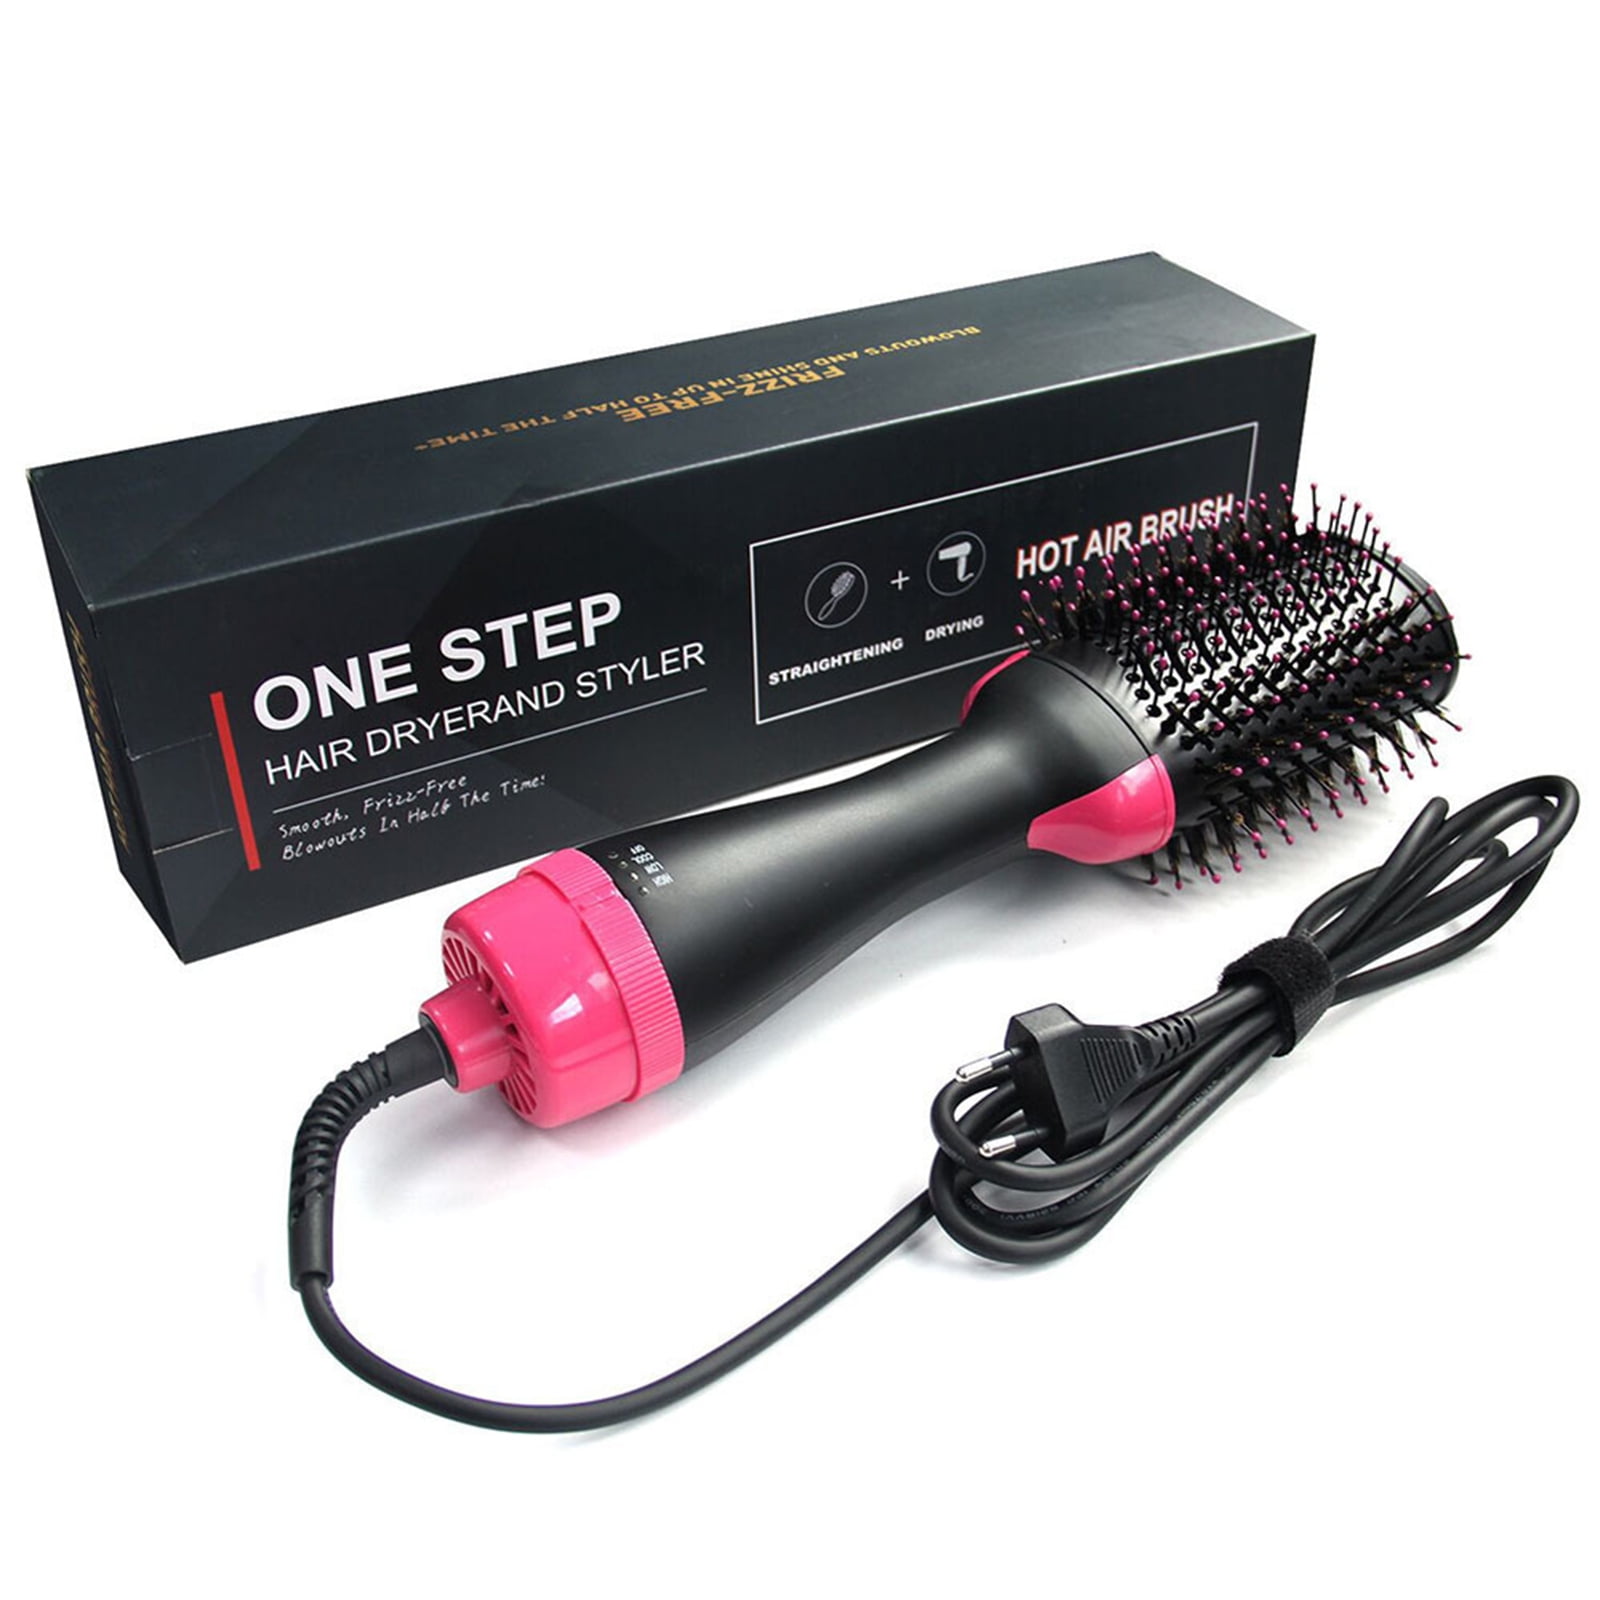 3 In 1 One Step Hair Dryer and Styler Volumizer, Hot Air Brush, All in One,  Professional , Leightweight Body, Negative Ion Generator, For All Hair  Textures, Anti-Scald Feature, High Power, Black -